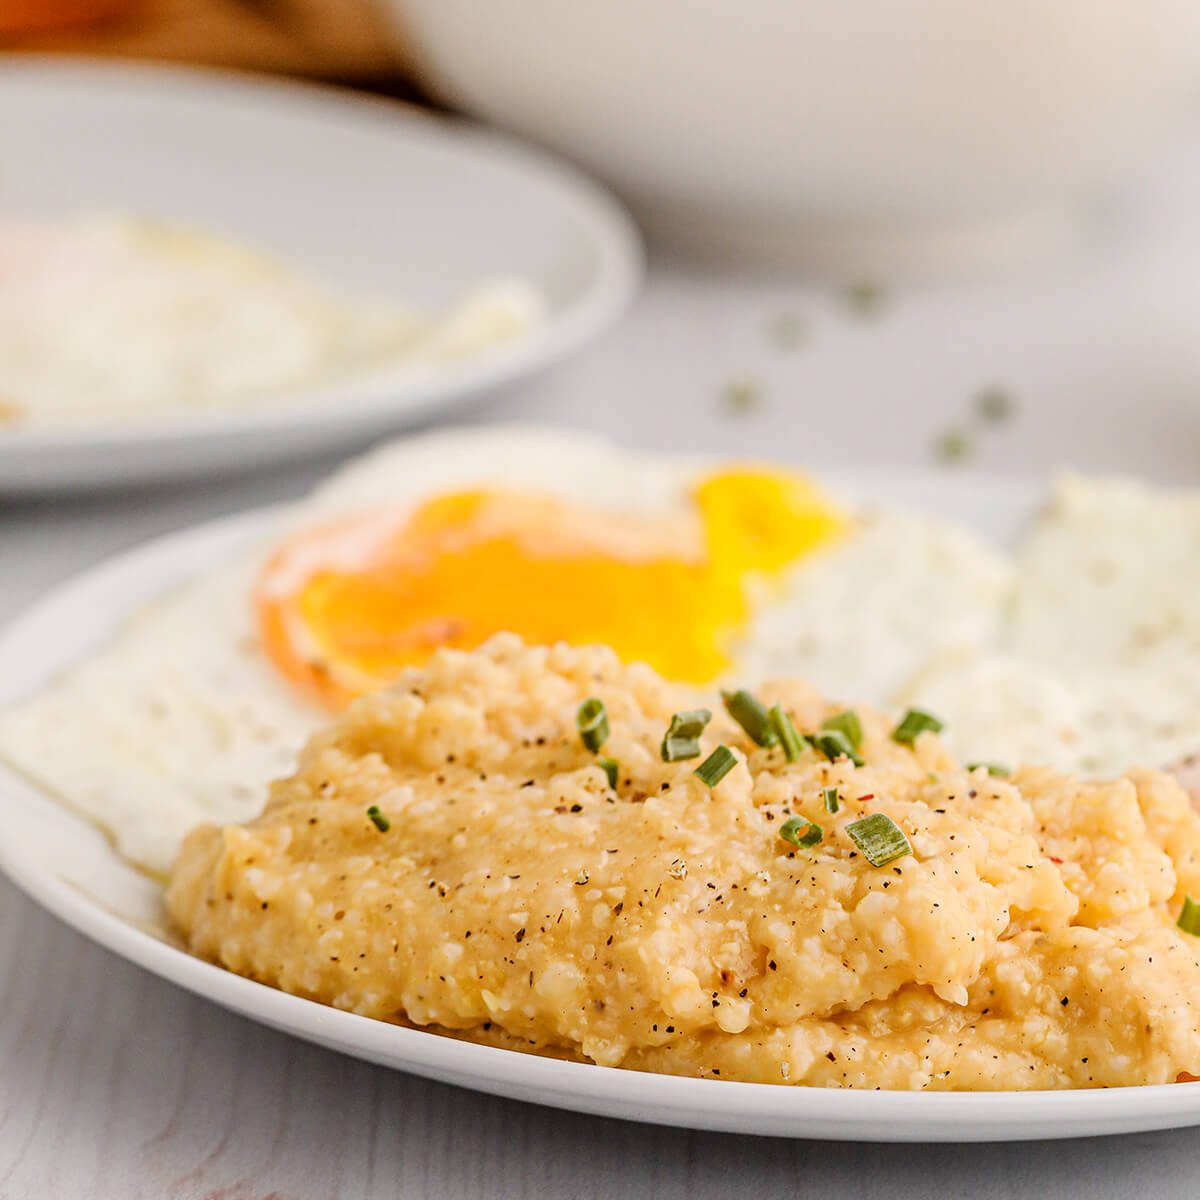 A white plate with a serving of cheese grits and over easy eggs.